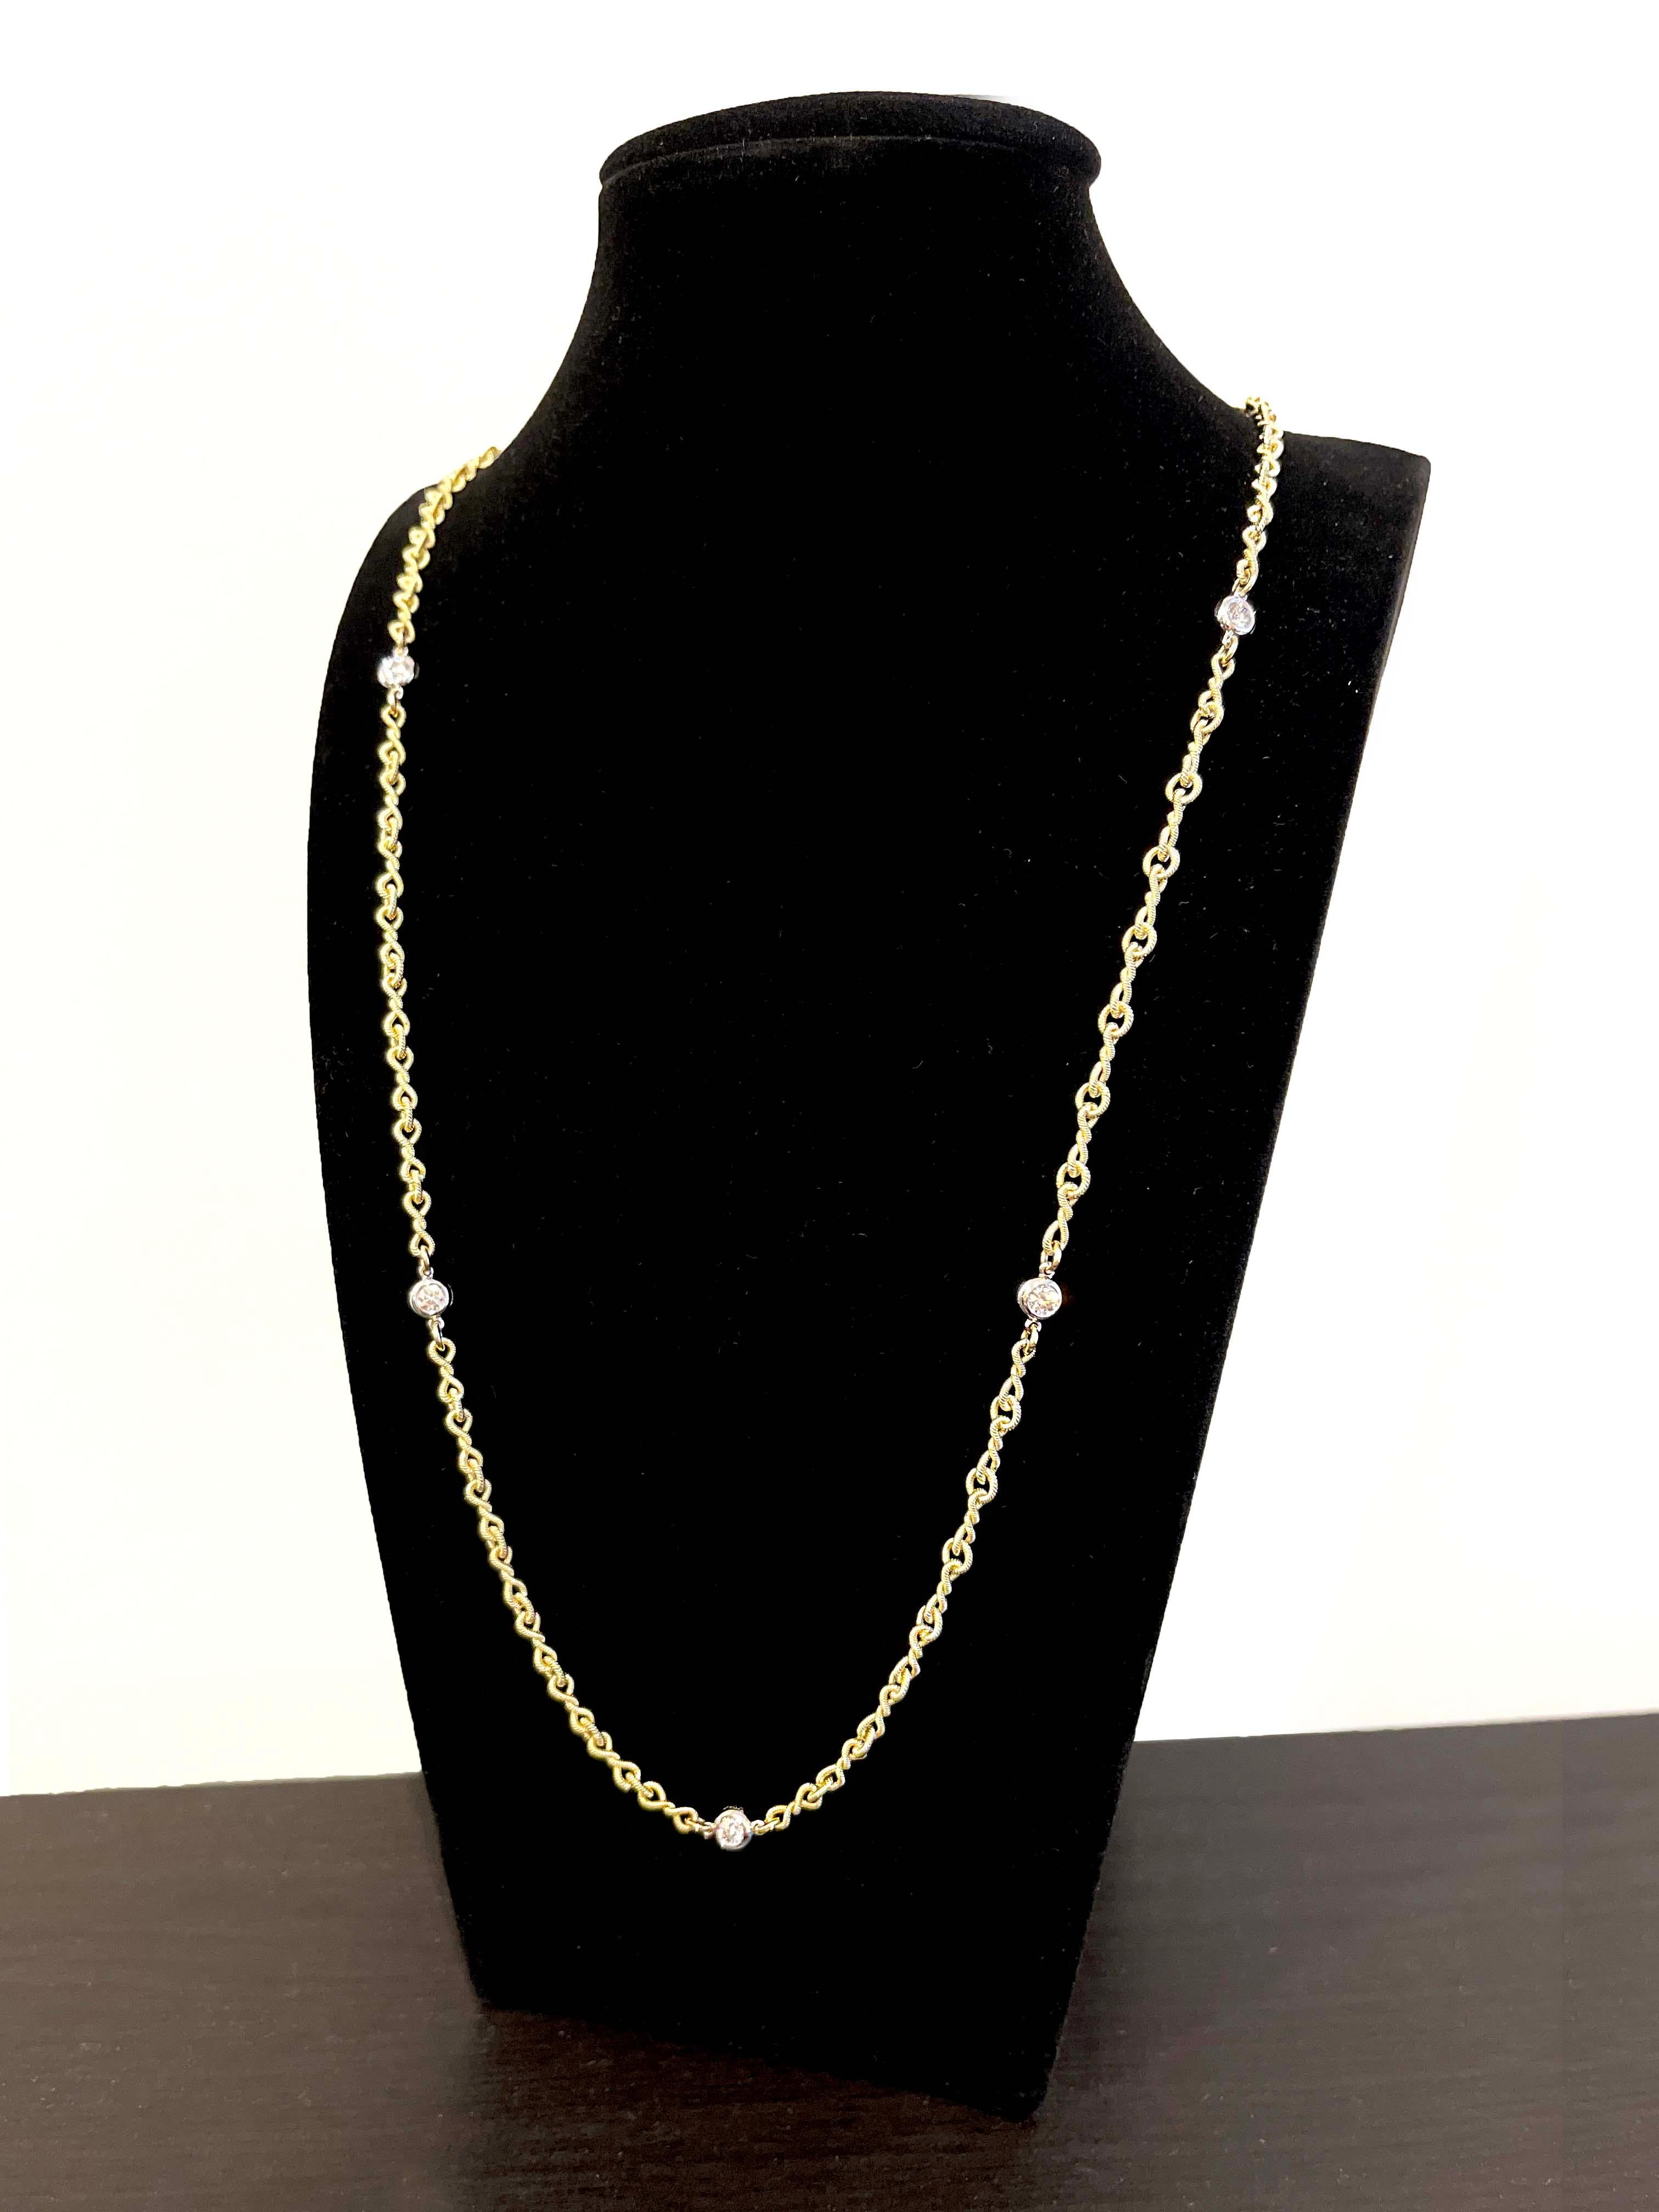 Artisan Vitolo 18 Karat Handmade Twisted Link Necklace with Diamond Bezels For Sale